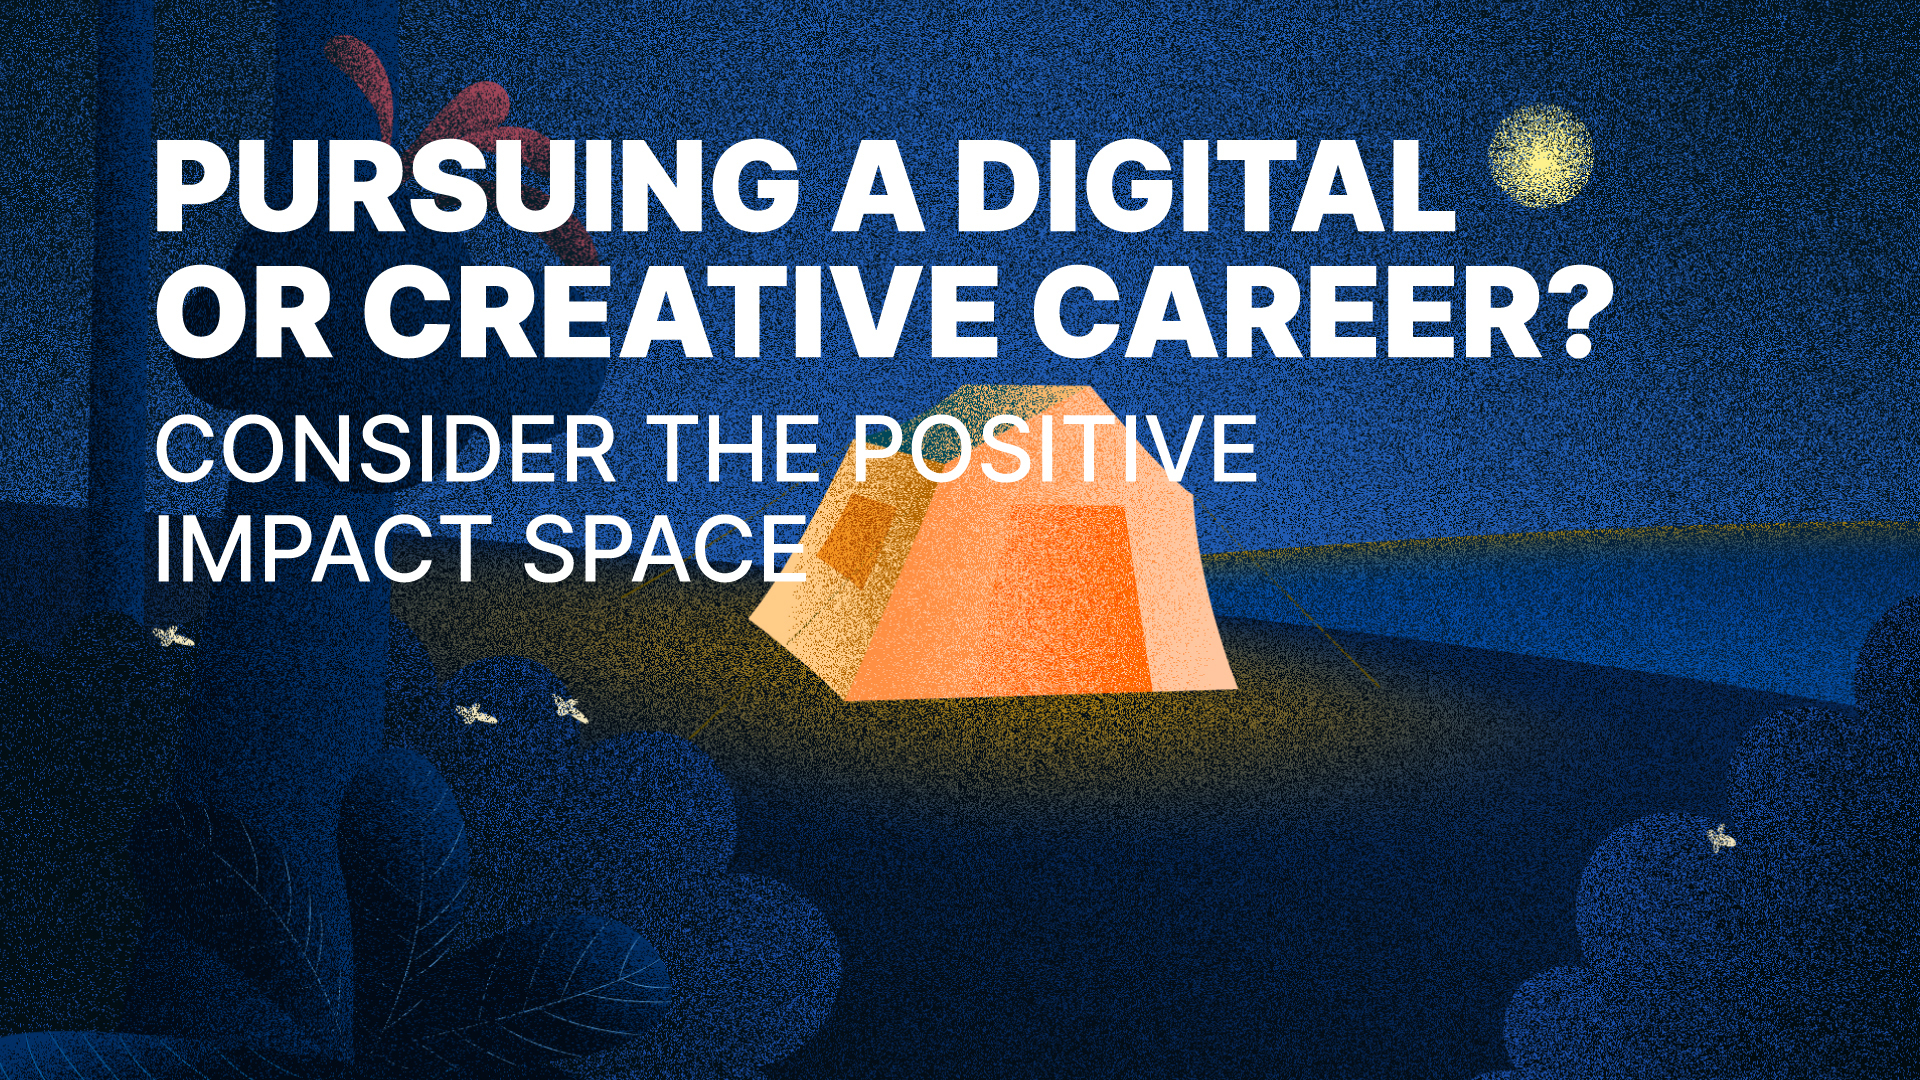 Interested in pursuing a digital or creative career? Consider the positive impact space!